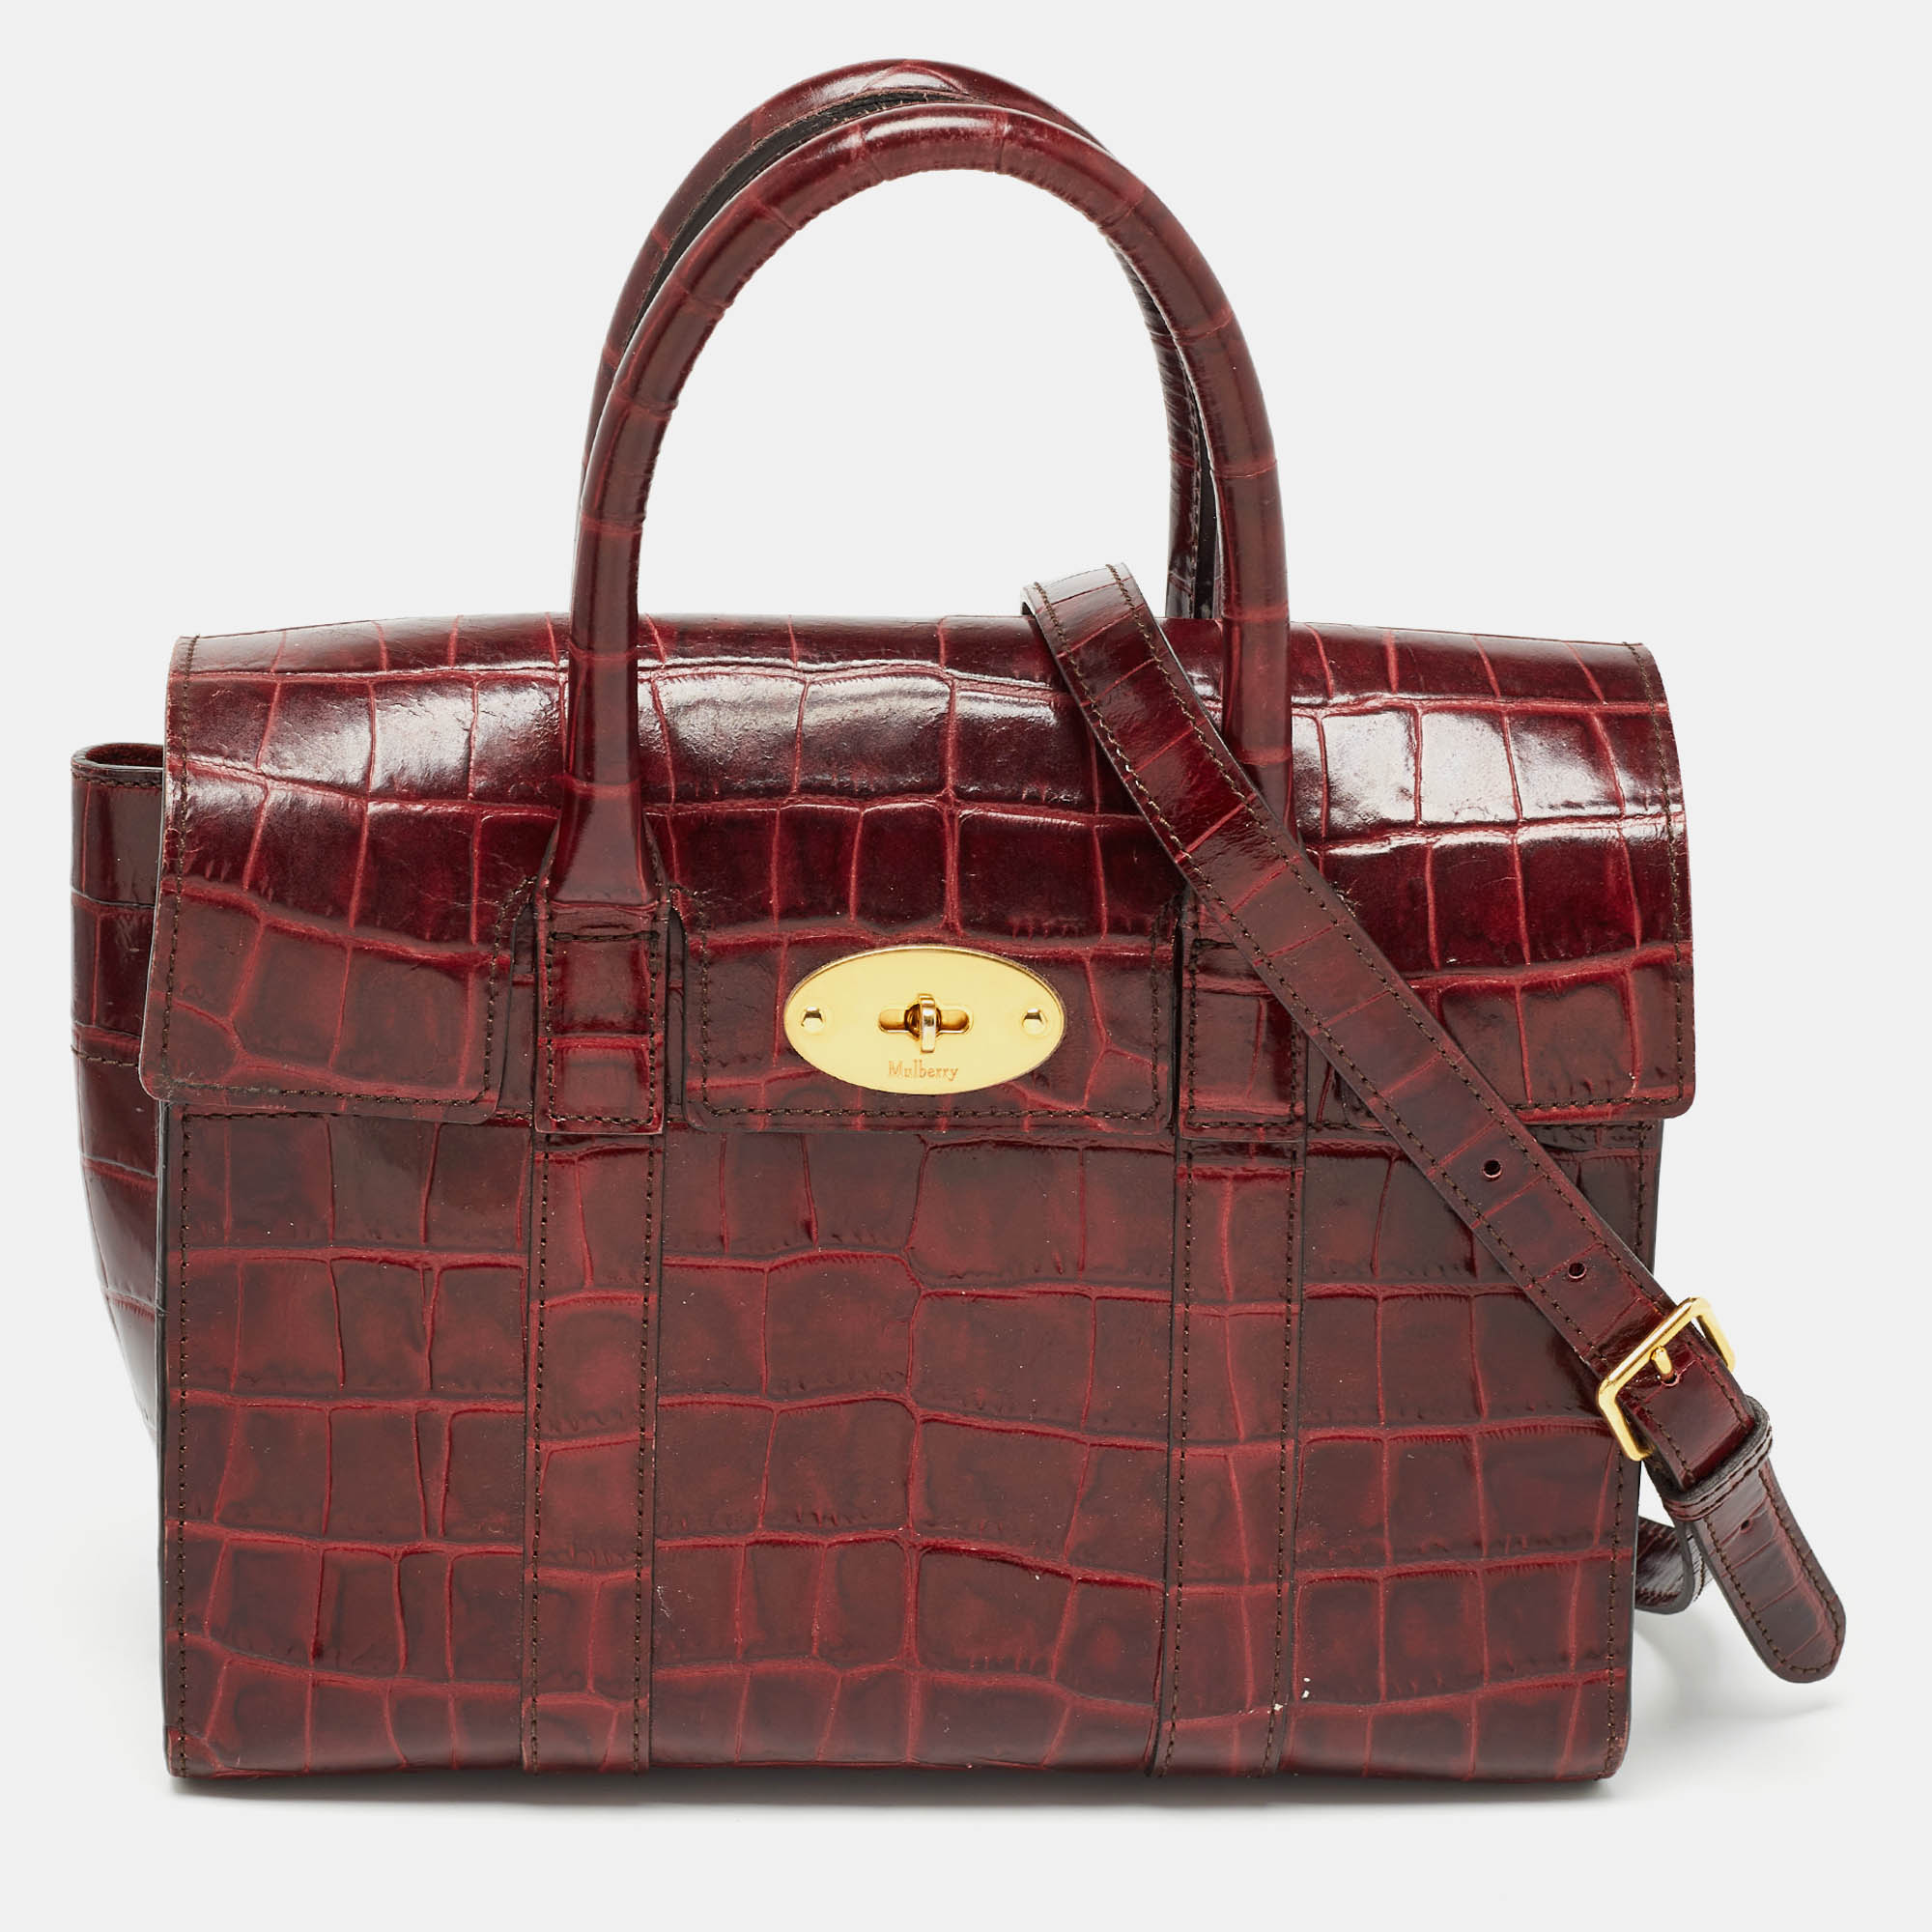 Mulberry burgundy croc leather small bayswater satchel